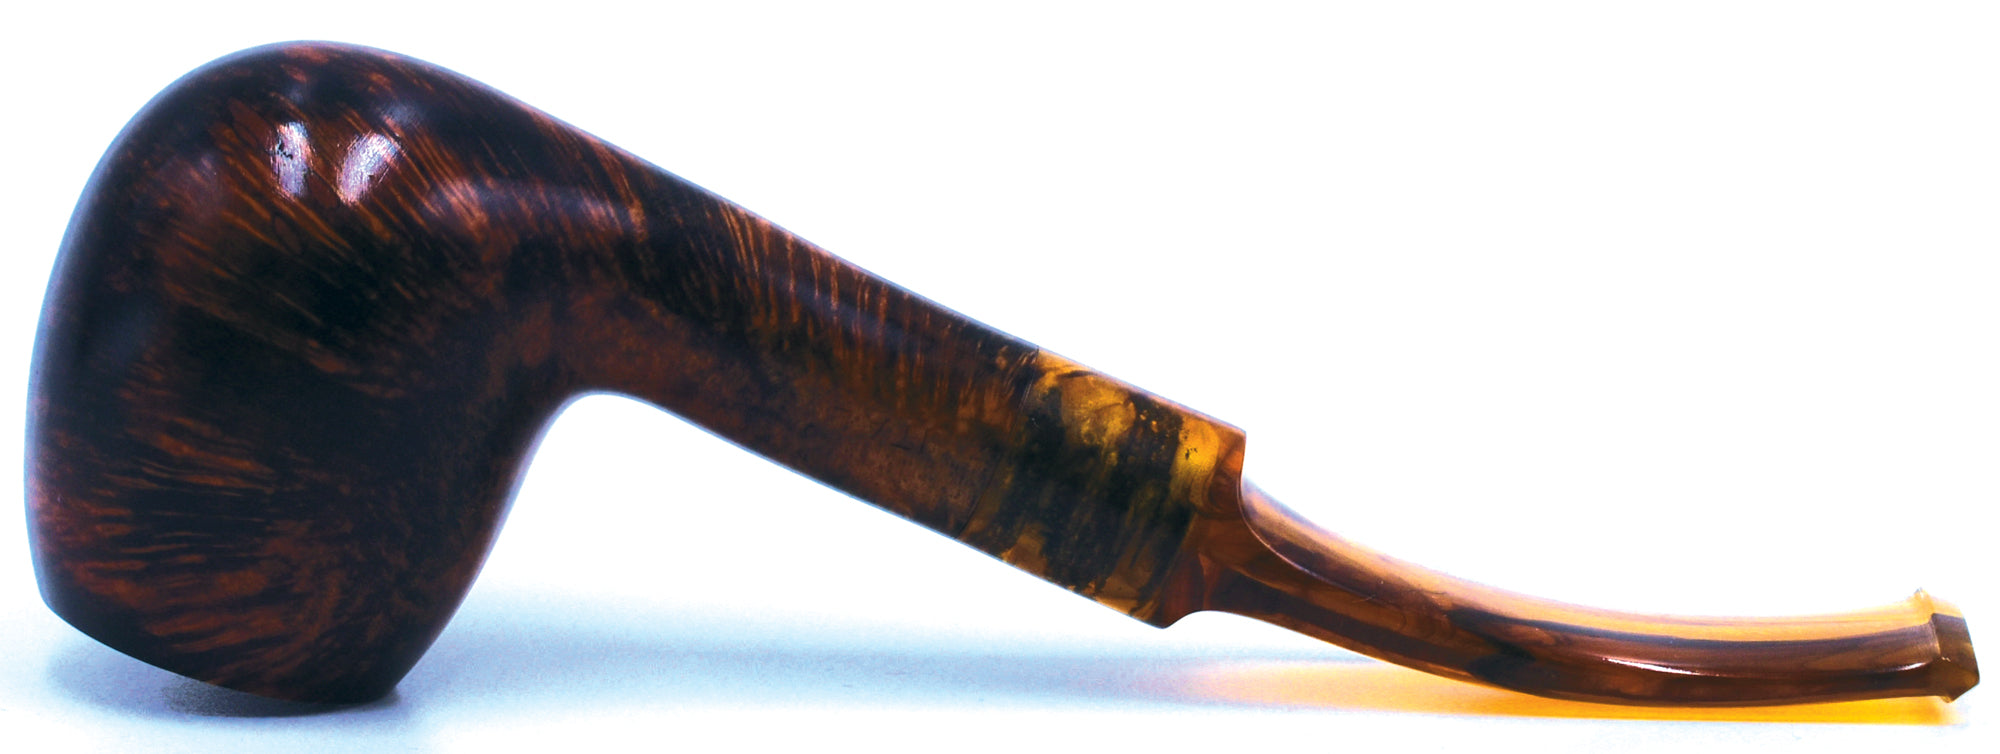 LEGENDEX® LASCALA* Plexiglass Mouthpiece 9 MM Filtered Briar Smoking Pipe Made In Italy 01-08-707